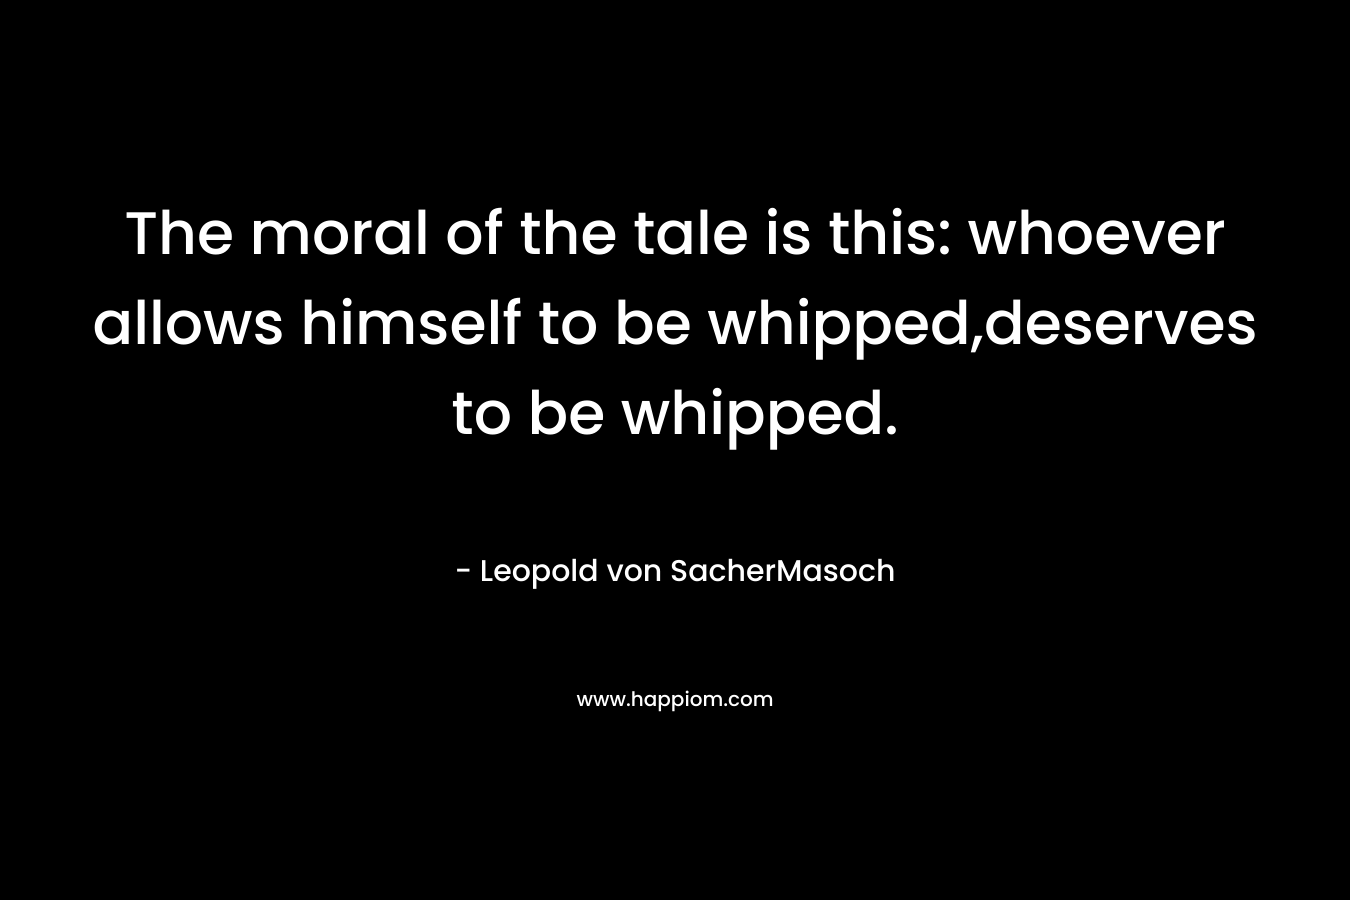 The moral of the tale is this: whoever allows himself to be whipped,deserves to be whipped. – Leopold von SacherMasoch